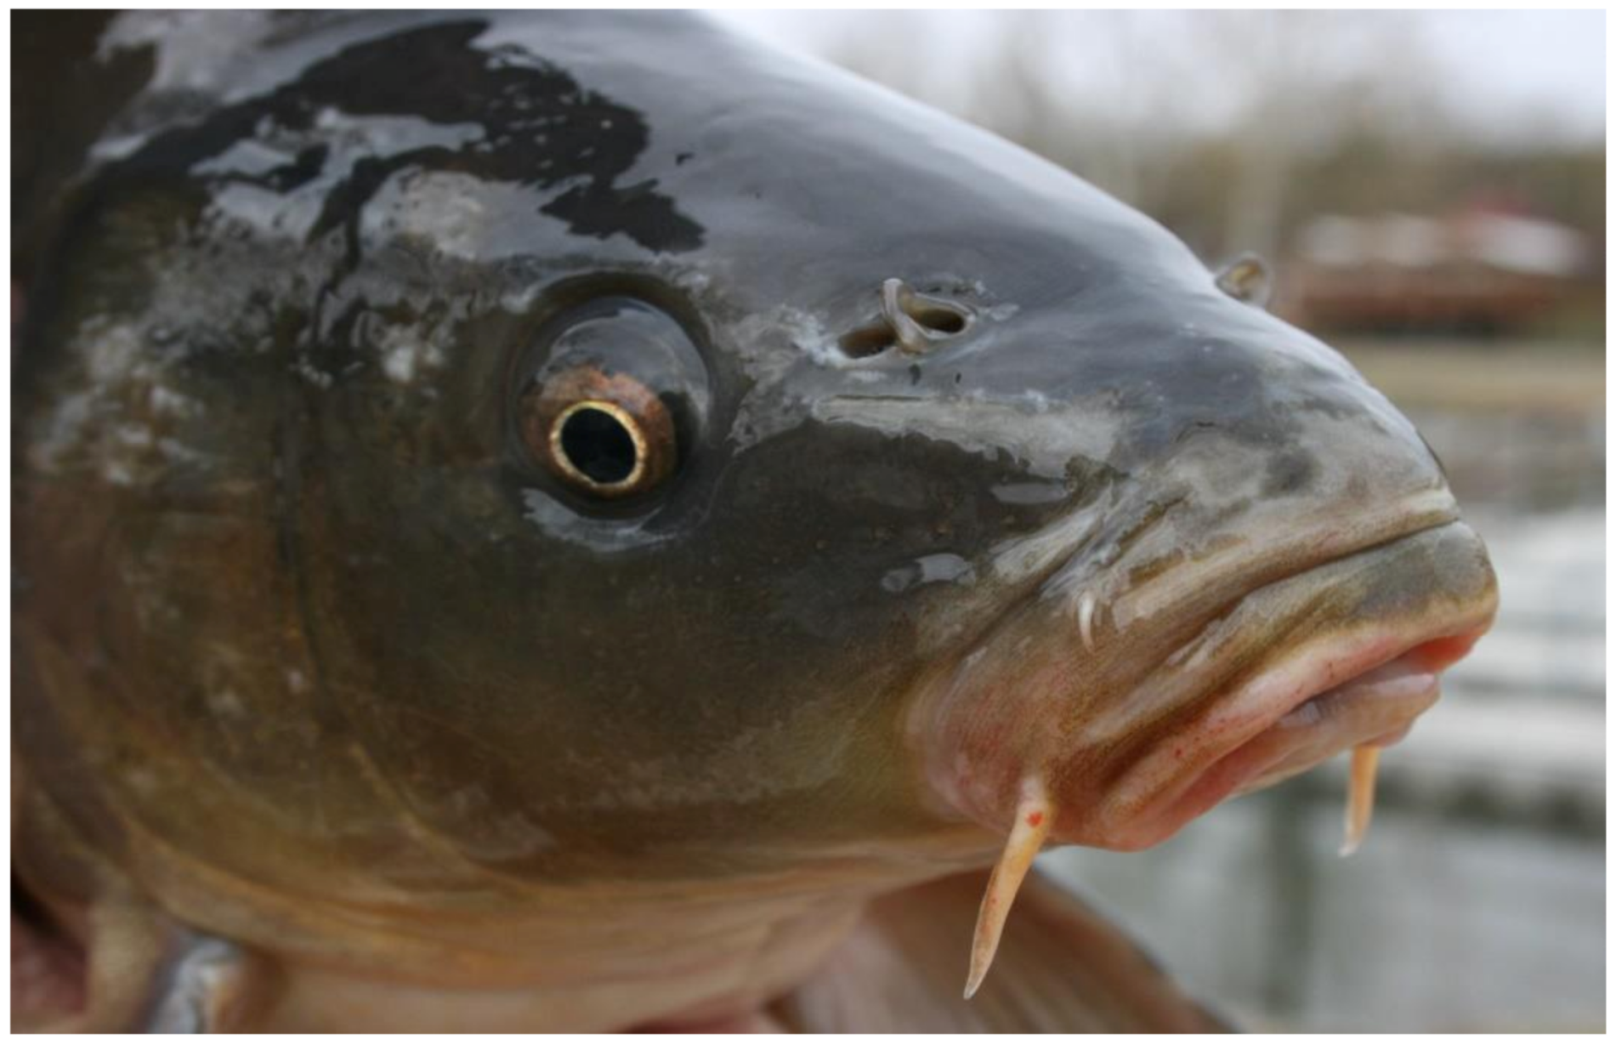 Life | Free Full-Text | Carp Breeding in the Carpathian Basin with a  Sustainable Utilization of Renewable Natural Resources